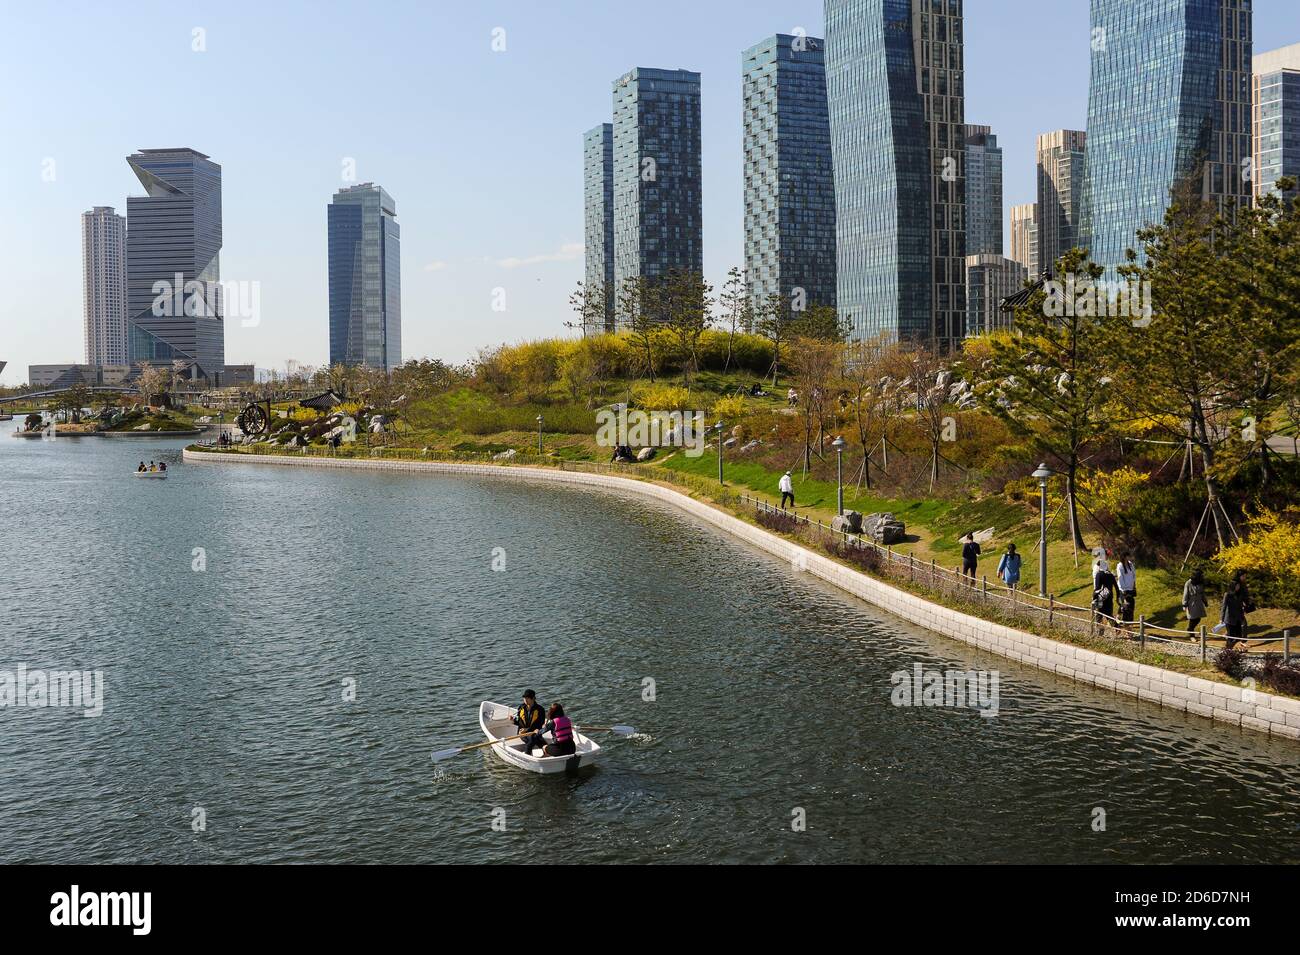 01.05.2013, Seoul, Incheon, South Korea - City view of the New Songdo City with Central Park, lake and the international business district with modern Stock Photo